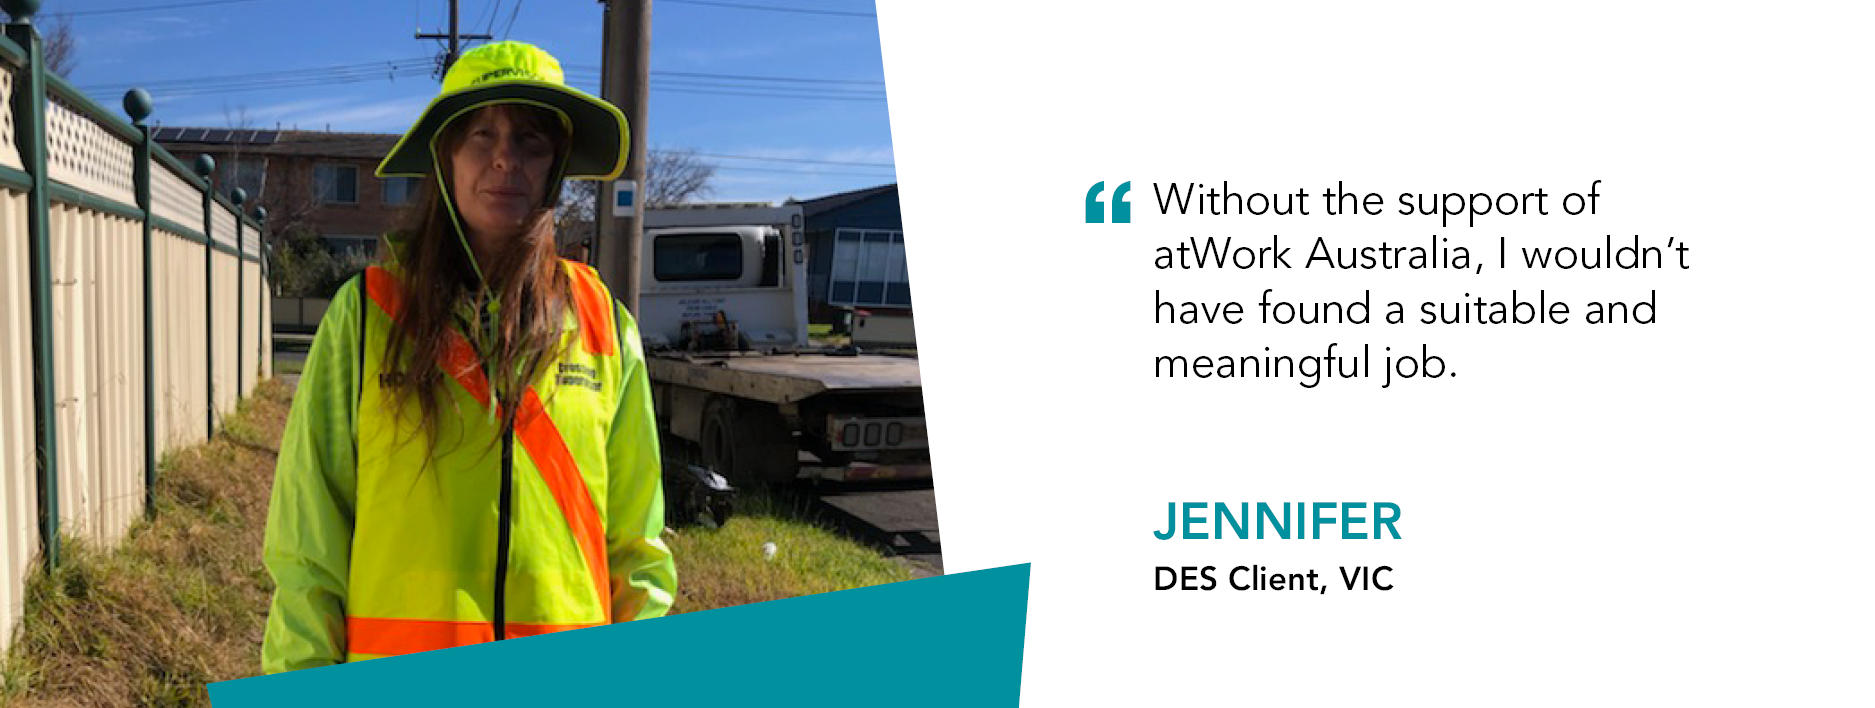 Jennifer stands in her high vis hat and vest. Quote reads "Without the support of atWork Australia, I wouldnt' have found a suitable and meaningful job." Jennifer DES Client Victoria